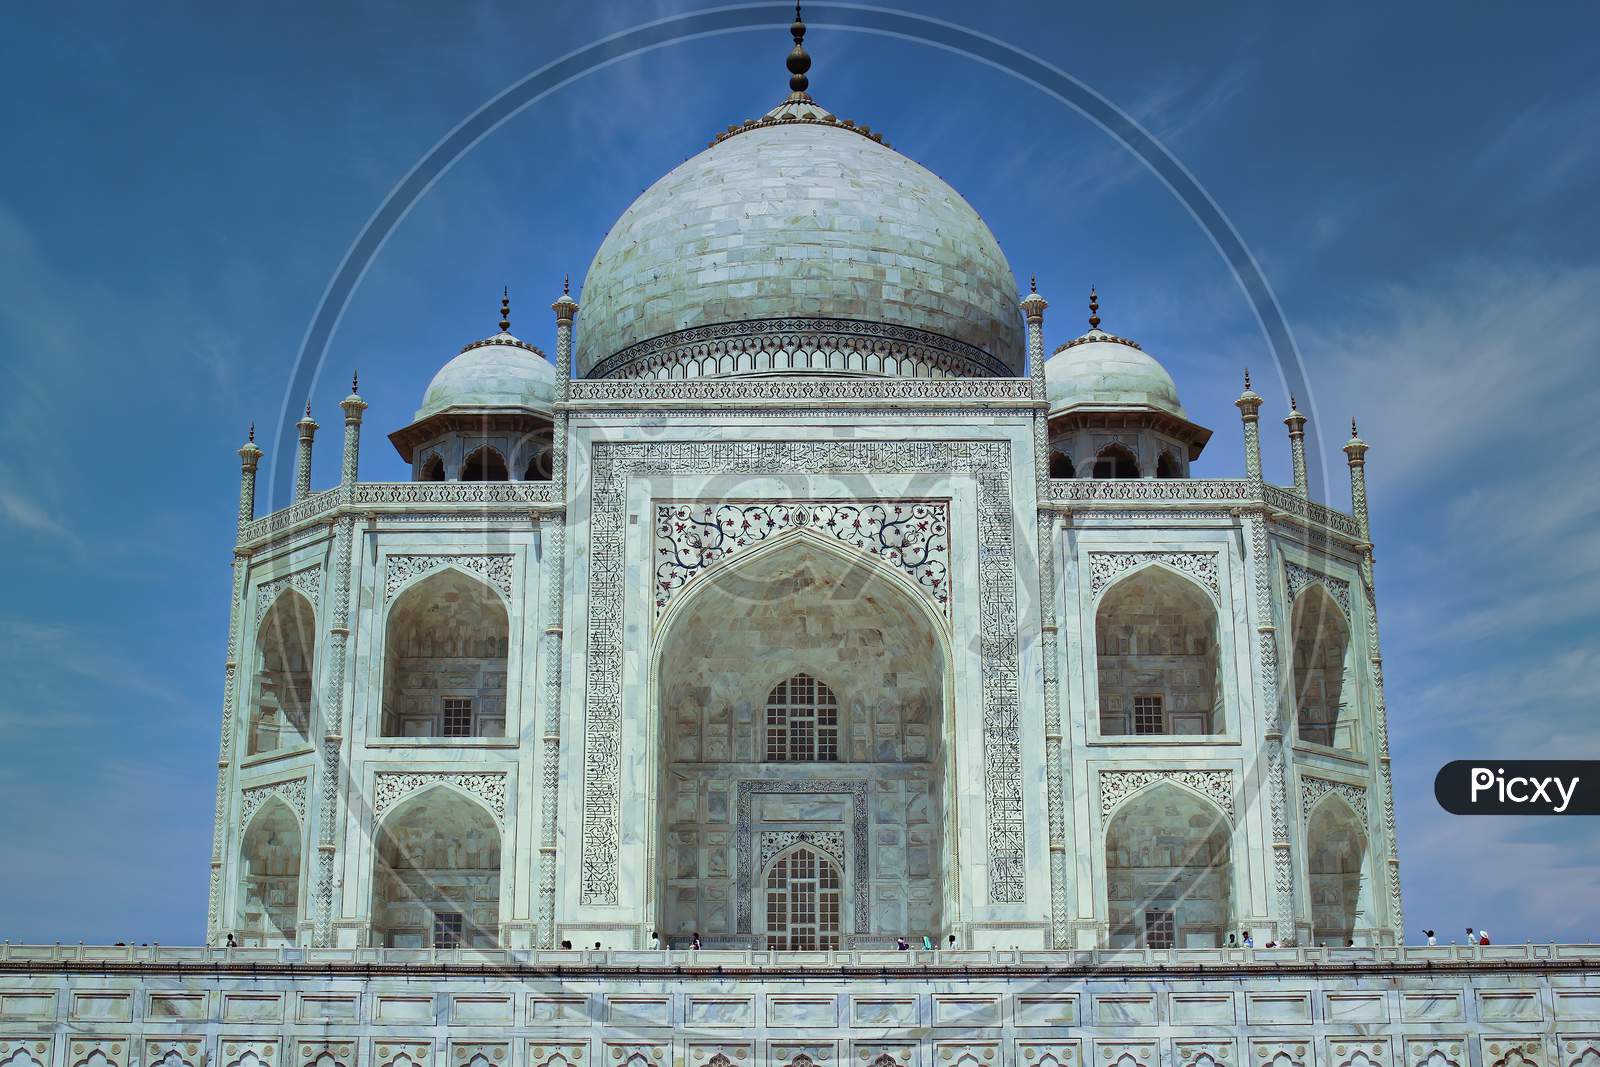 Agra, India - May 12, 2012: Close Up Shot Of Sharply Focused Taj Mahal Monument (A Symbol Of Love) Against Dramatic Blue Sky